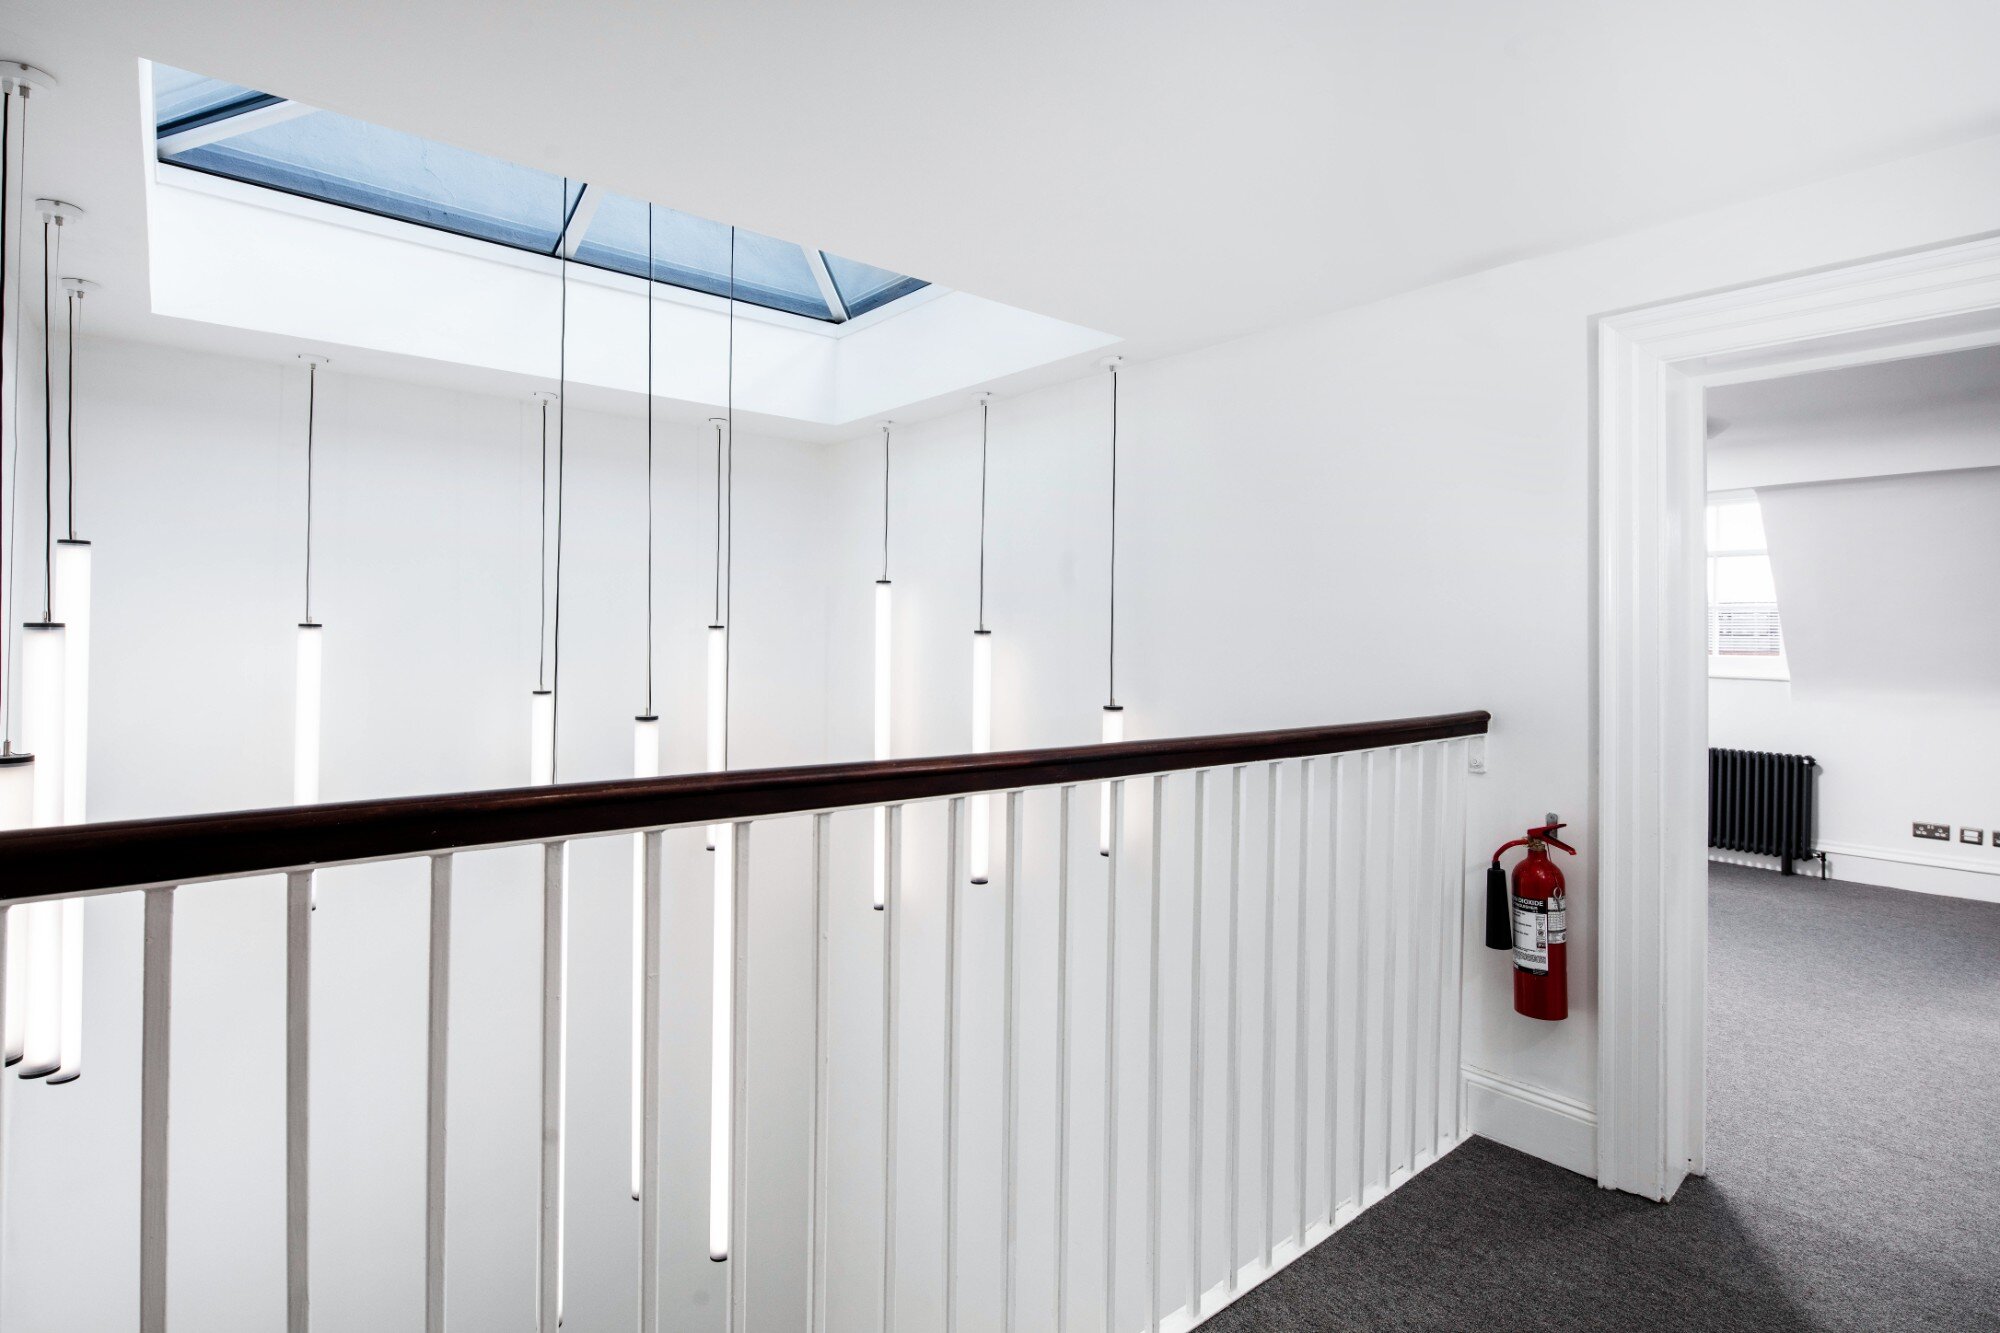 Architectural feature lighting for a CAT A office fitout at 9 Portland Square, Bristol.